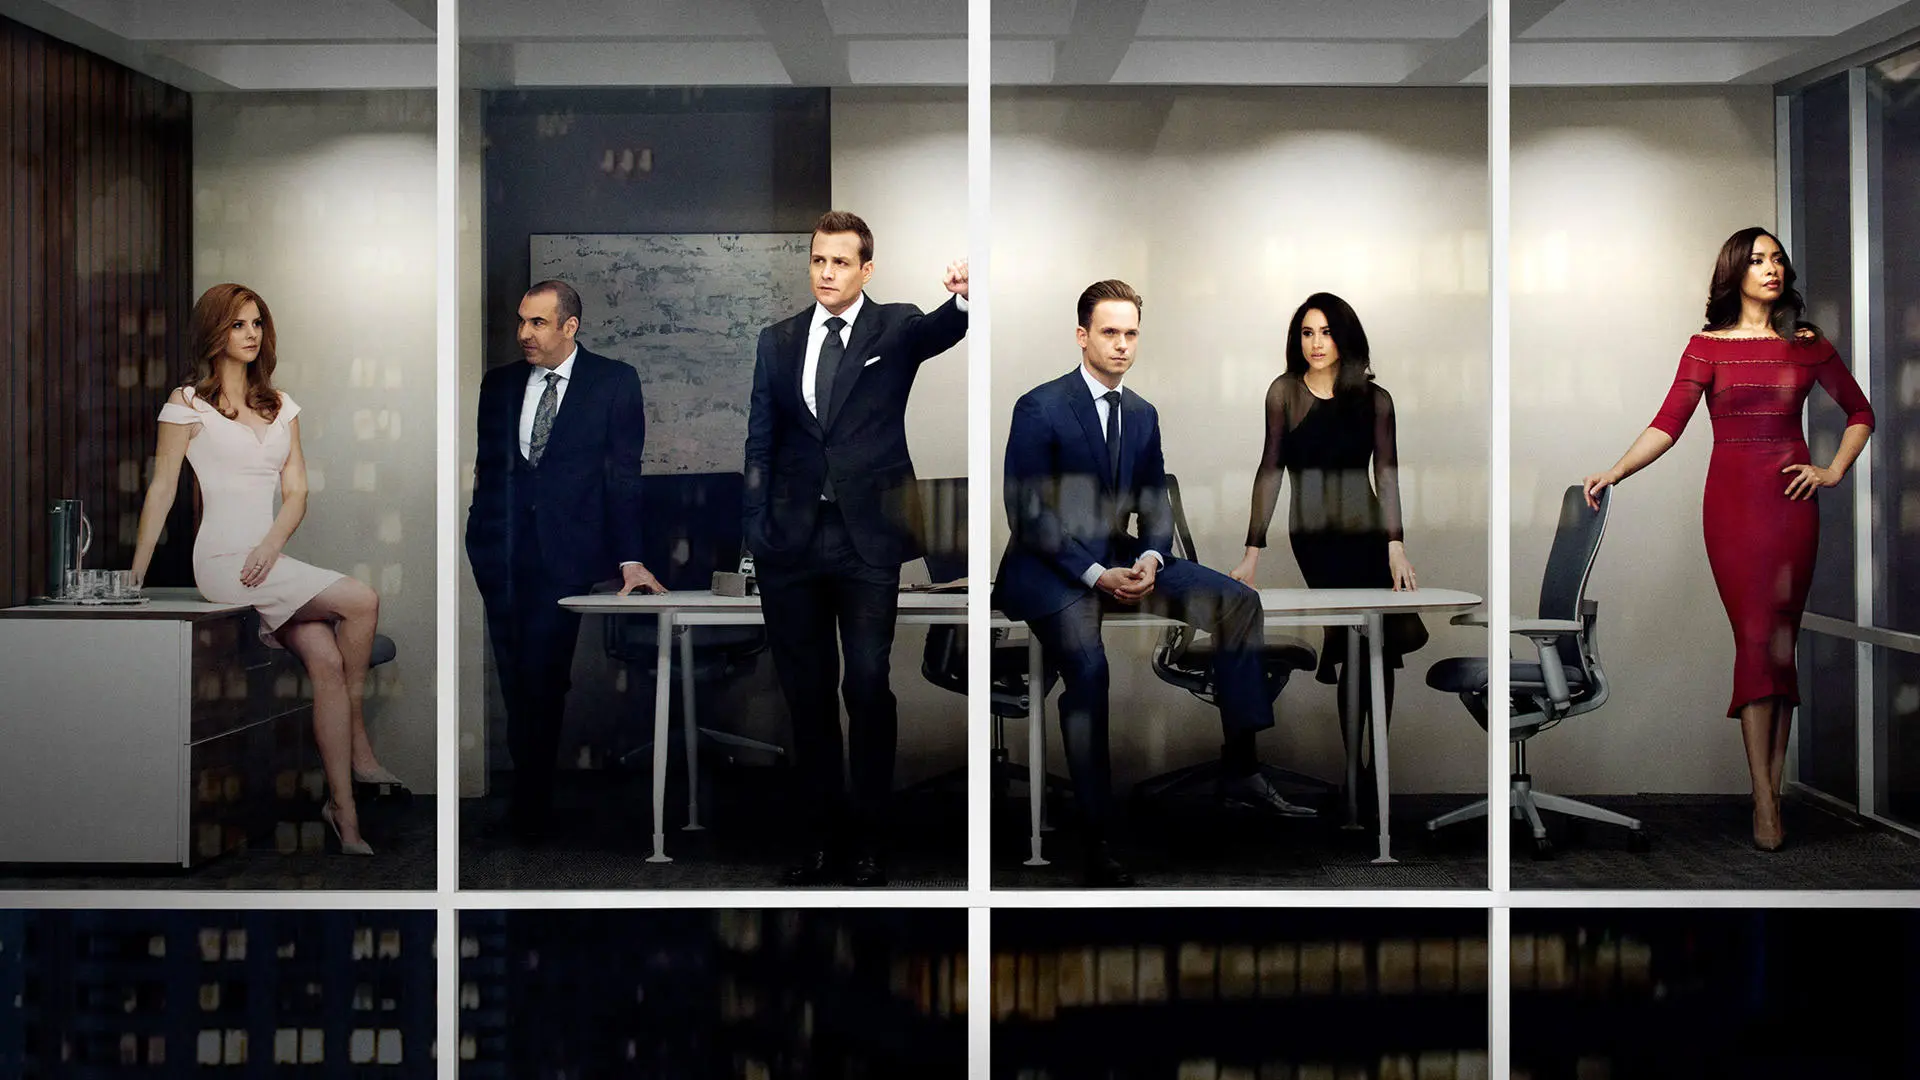 Behind the Scenes Why Fans Still Miss 'Suits' and Hope for Its Big Return